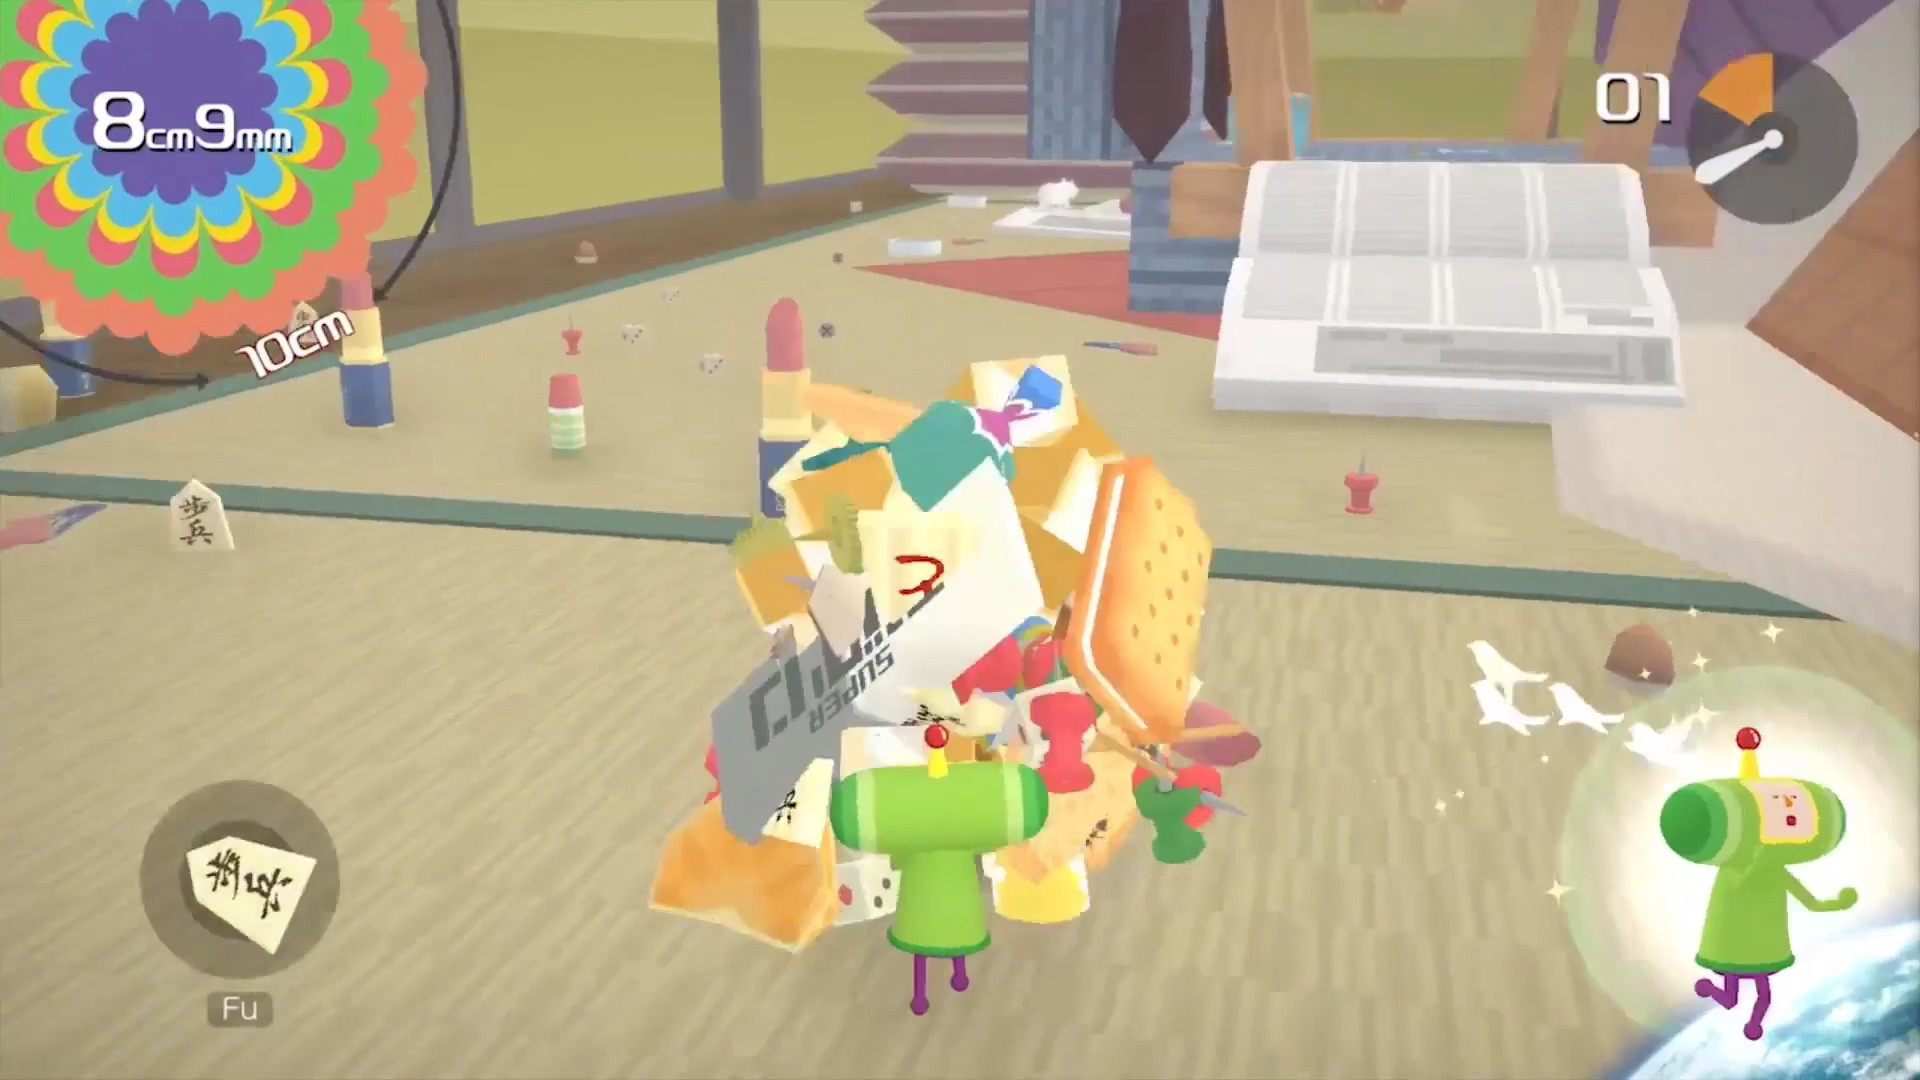 1920x1080 The game is slated for Winter 2018 and I sincerely hope you all try it if  it's your first Katamari title.